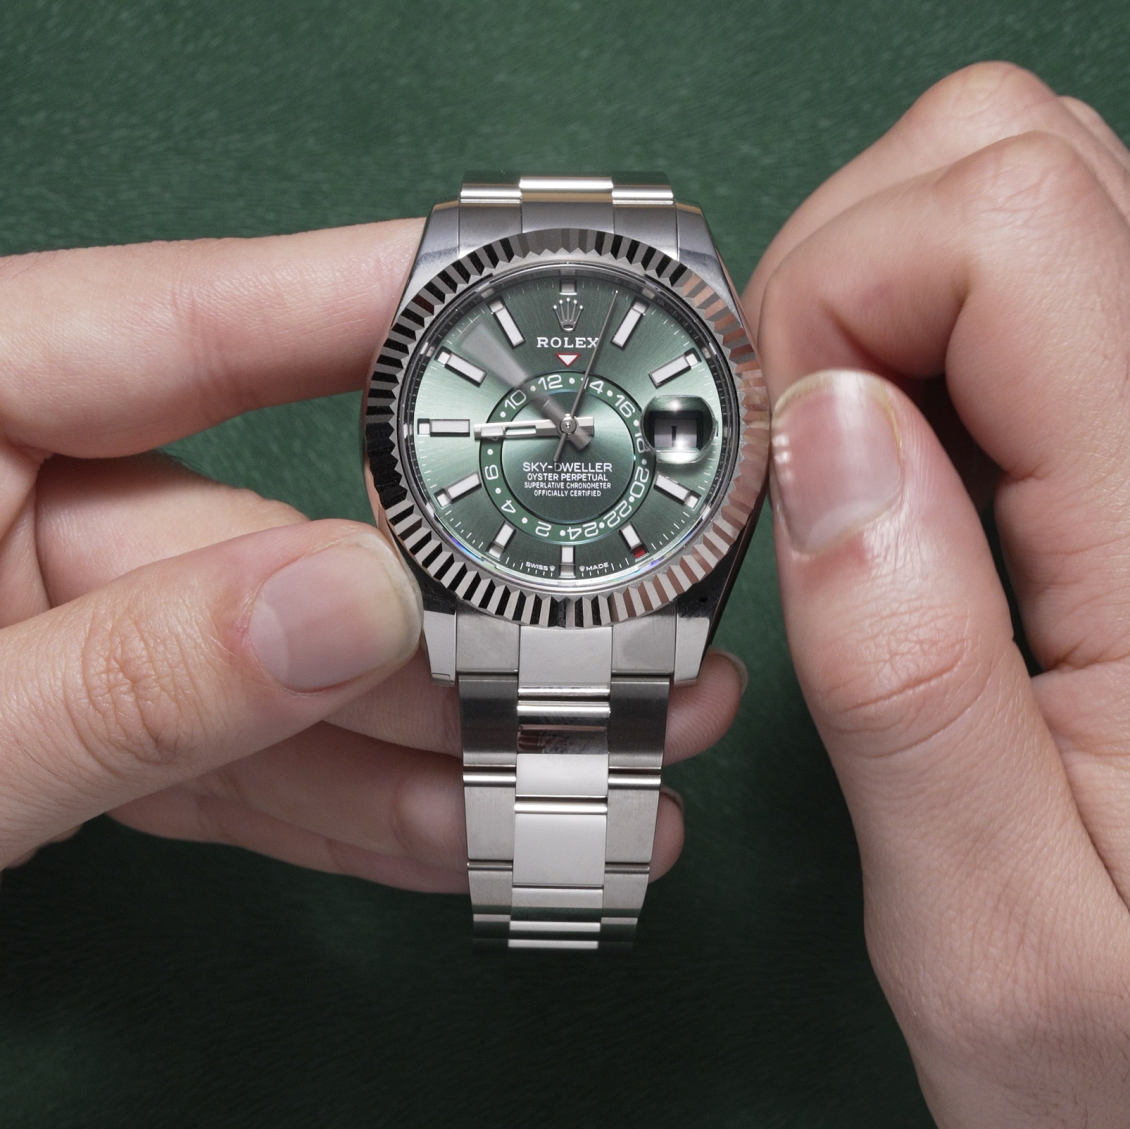 How to use the Rolex Sky-Dweller